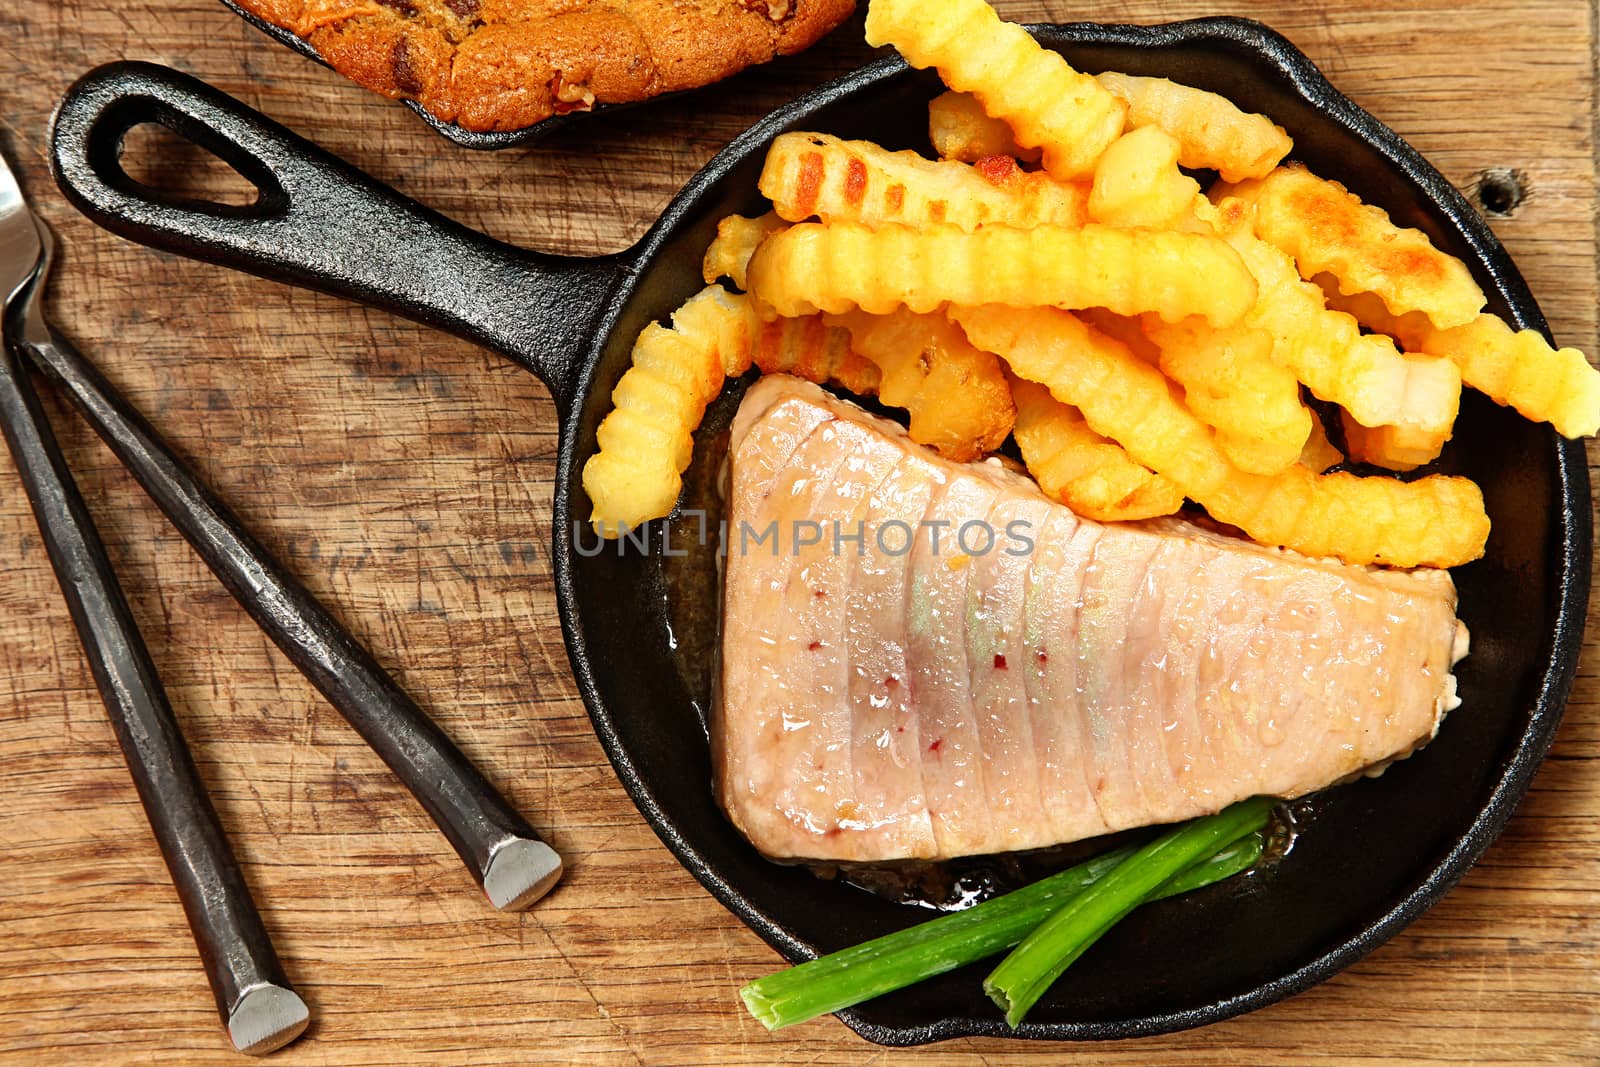 Sashimi Tuna and Chips in Skillet on Table at home or restaurant.